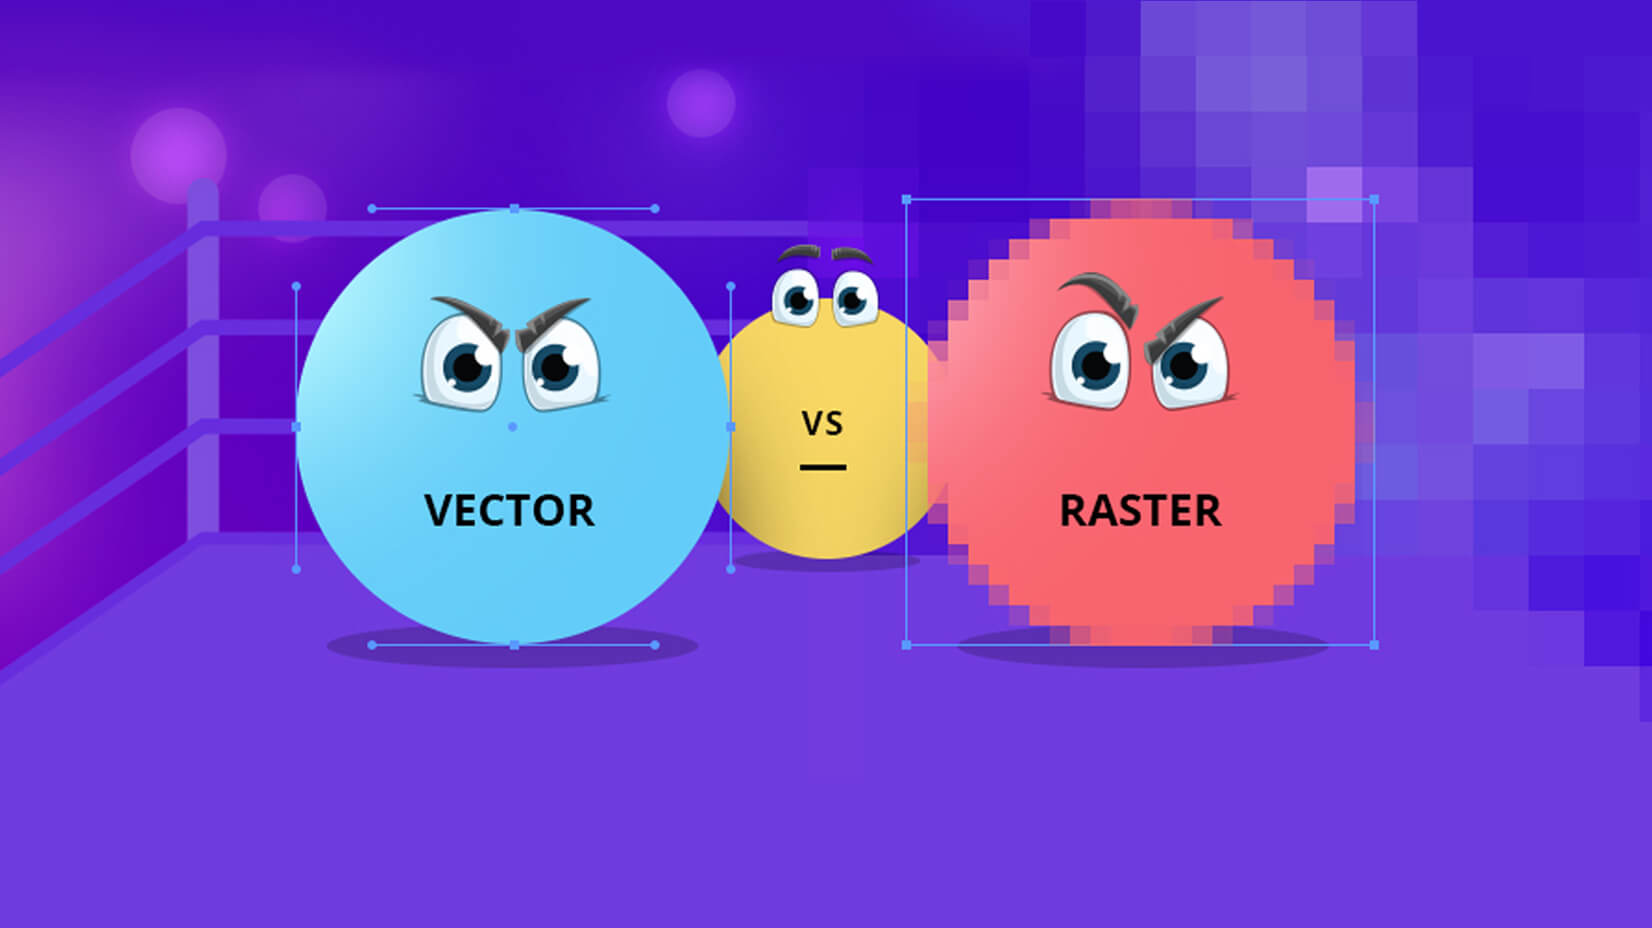 Vector and raster.